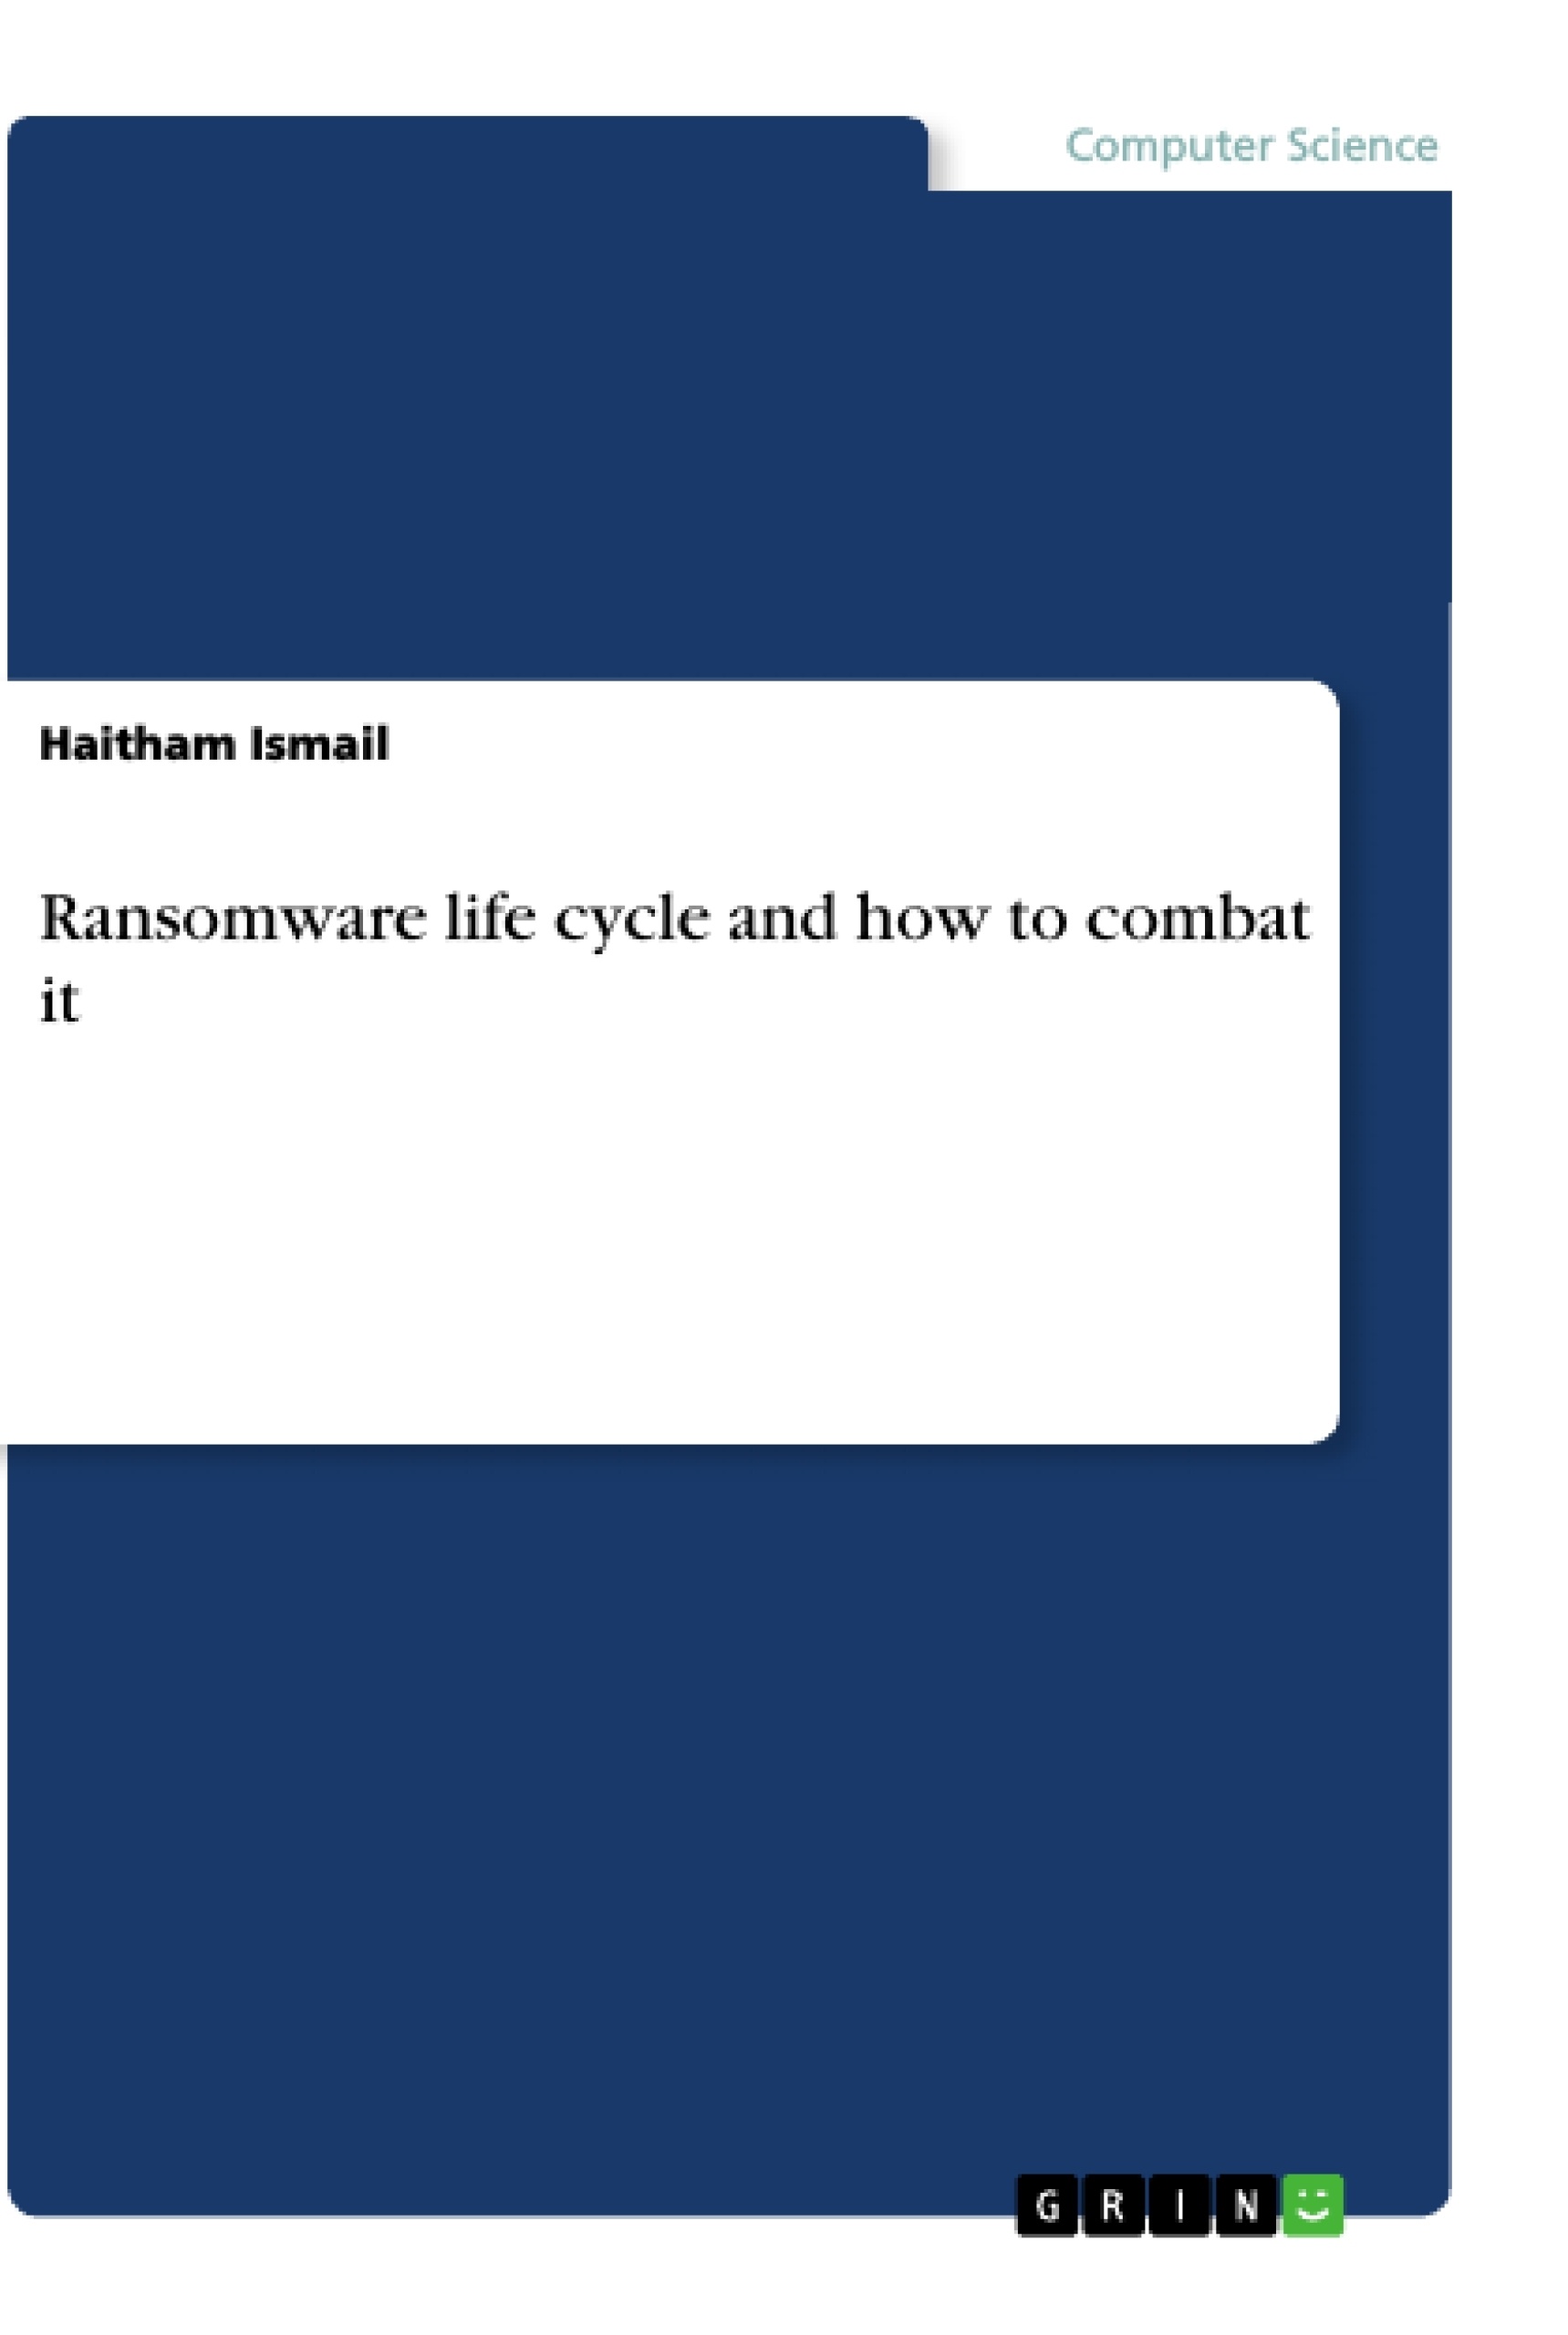 Title: Ransomware life cycle and how to combat it